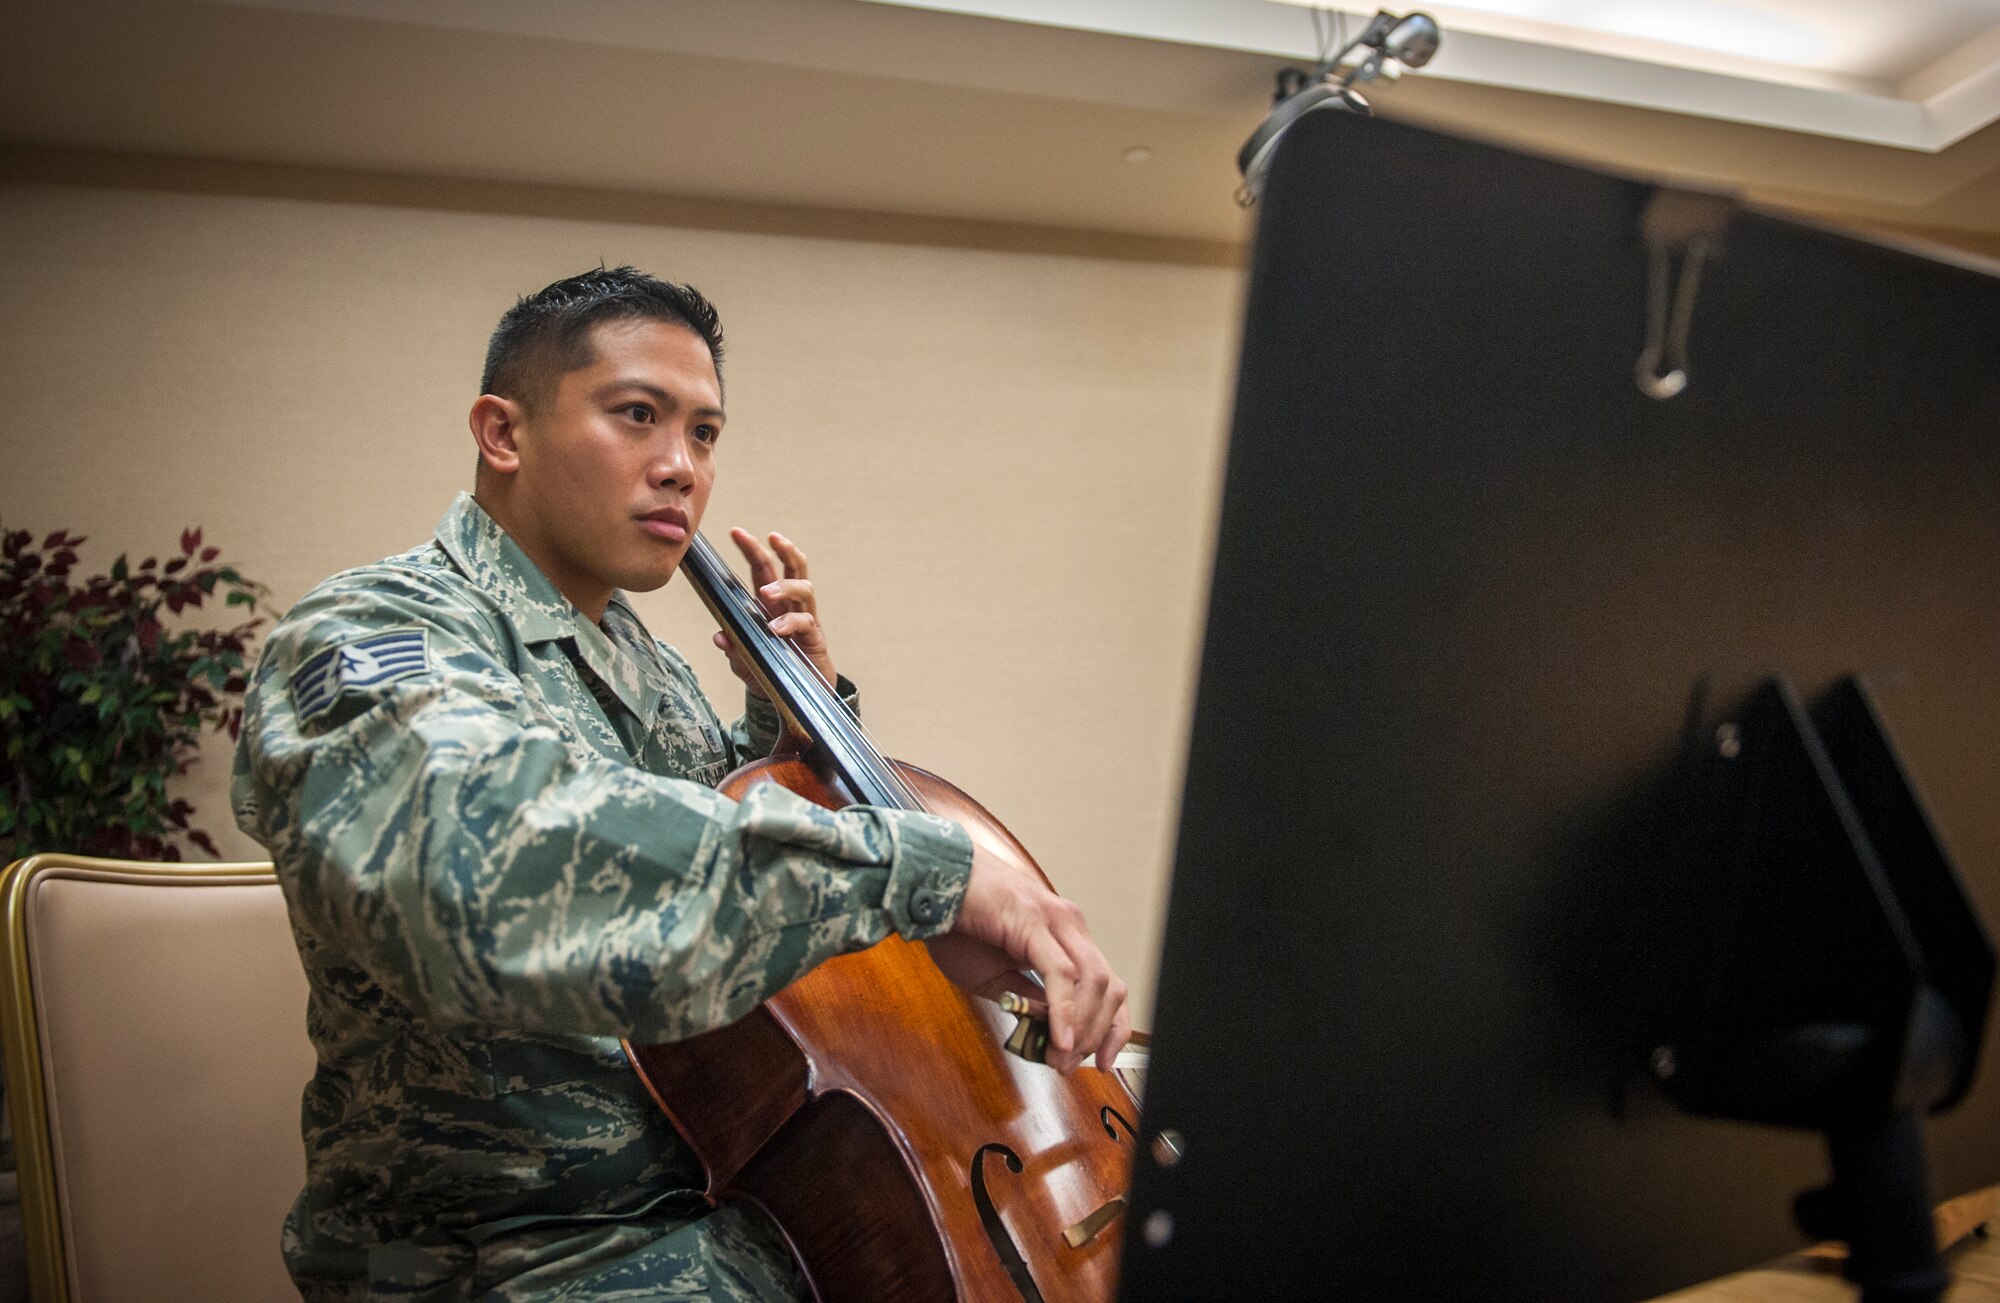 U.S. Air Force Staff Sgt. Joey Lee, 23d Aerospace Medicine Squadron public health technician, plays the national anthem on his cello at Moody Air Force Base, Ga., Sept. 6, 2013. Lee started playing the cello when he was 9. (U.S. Air Force photo by Senior Airman Jarrod Grammel/Released)
